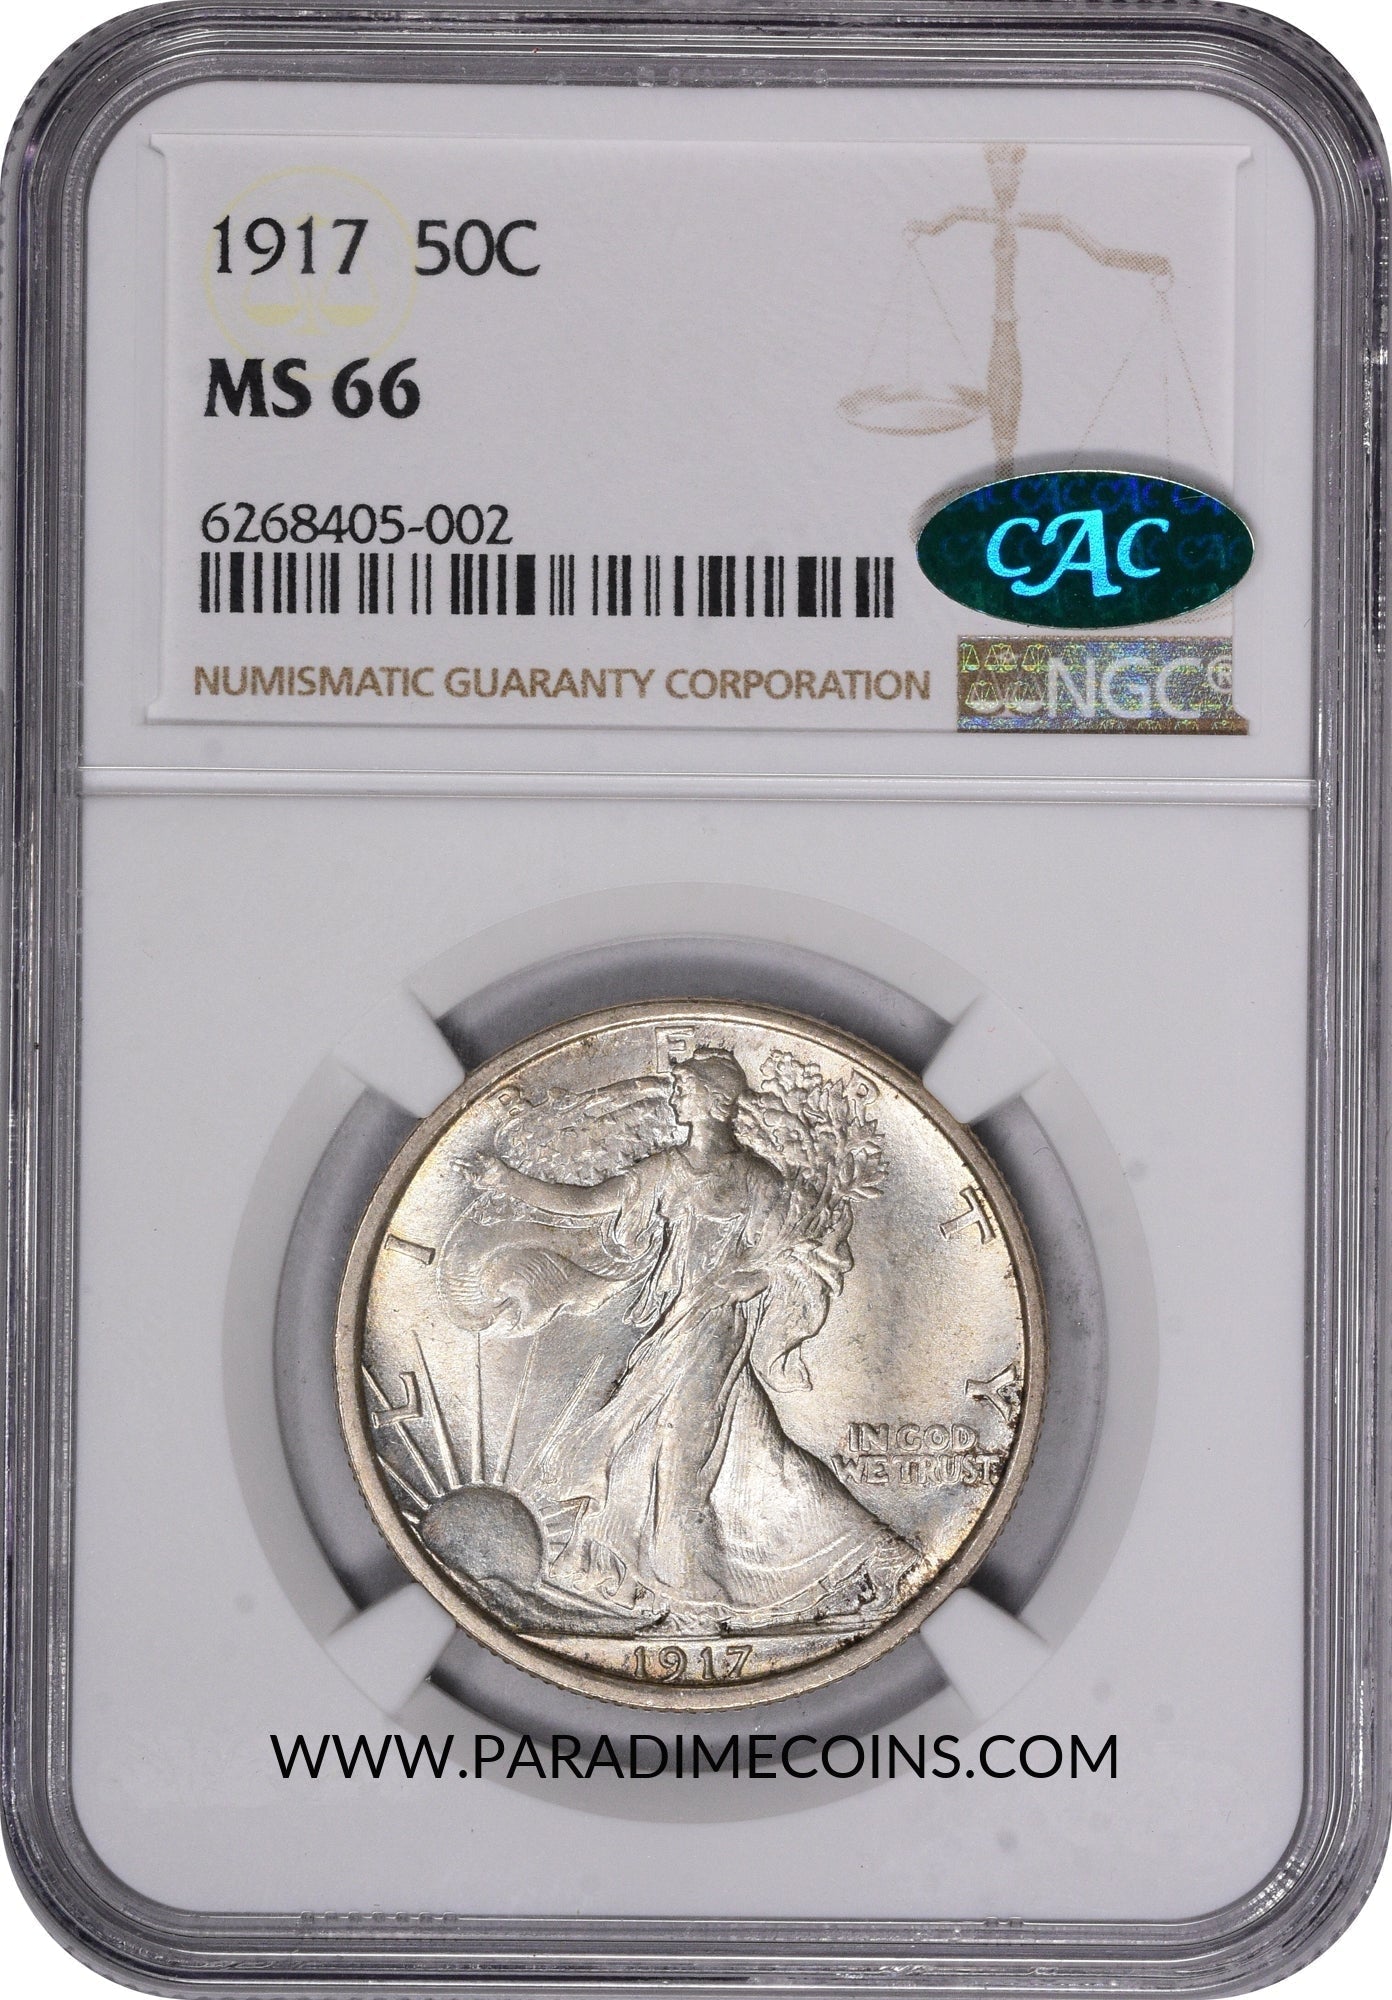 1917 50C MS66 NGC CAC - Paradime Coins US Coins For Sale